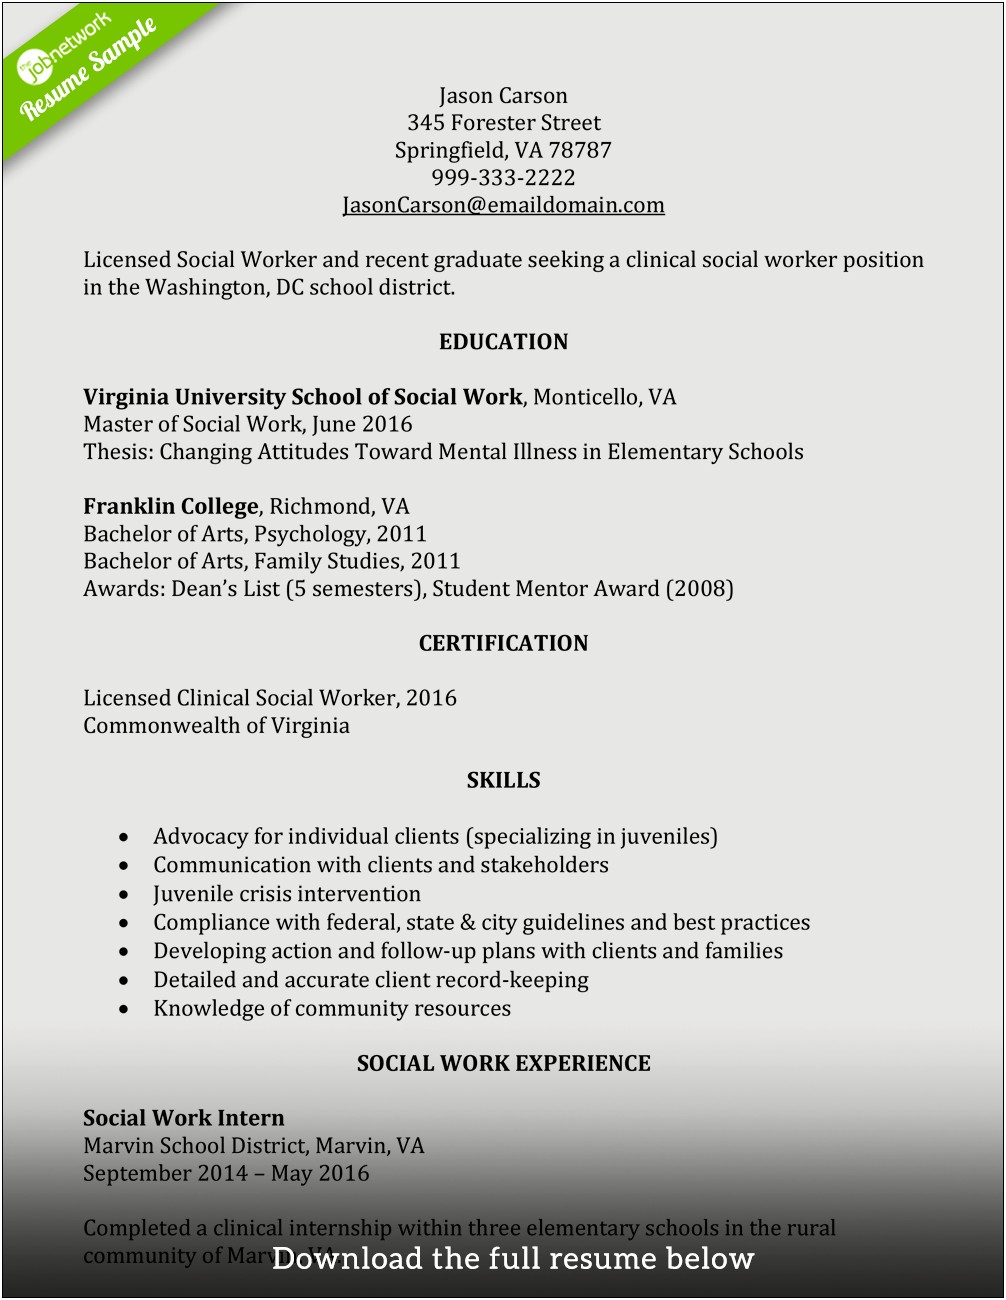 Licensed Clinical Social Worker Resume Example